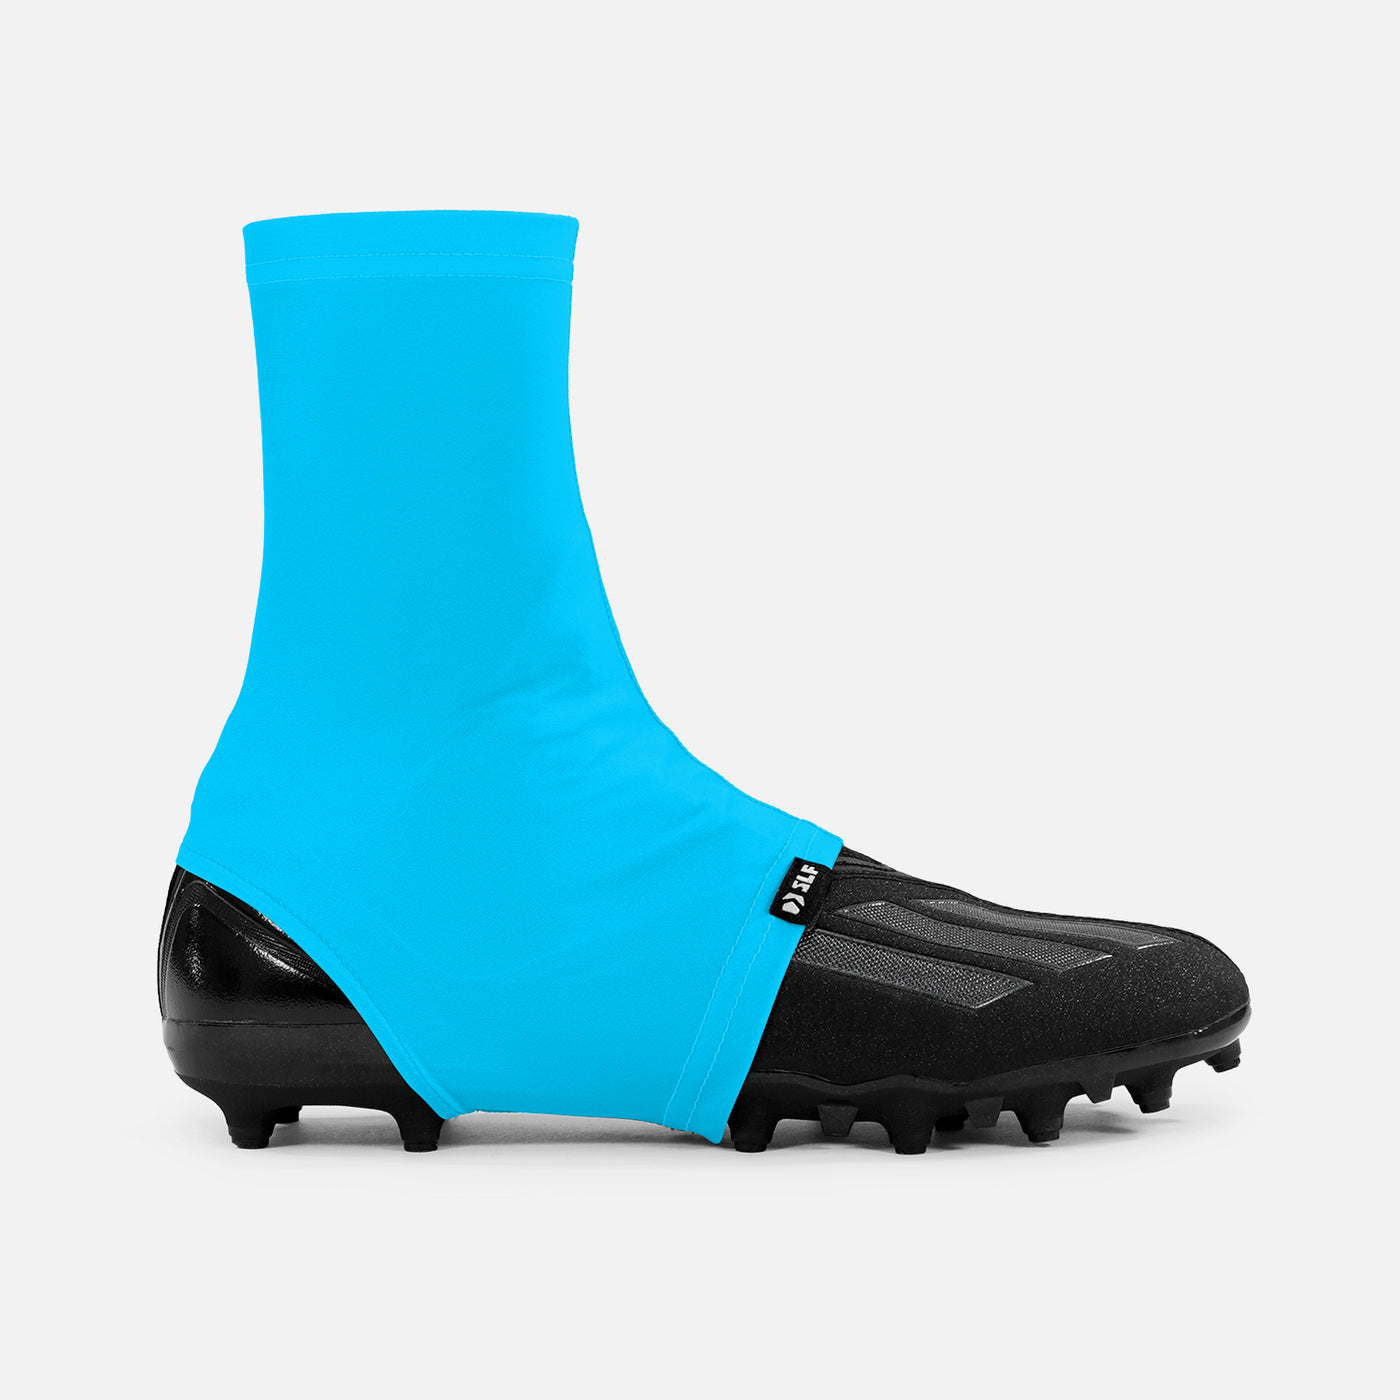 Hue Sky Blue Spats / Cleat Covers